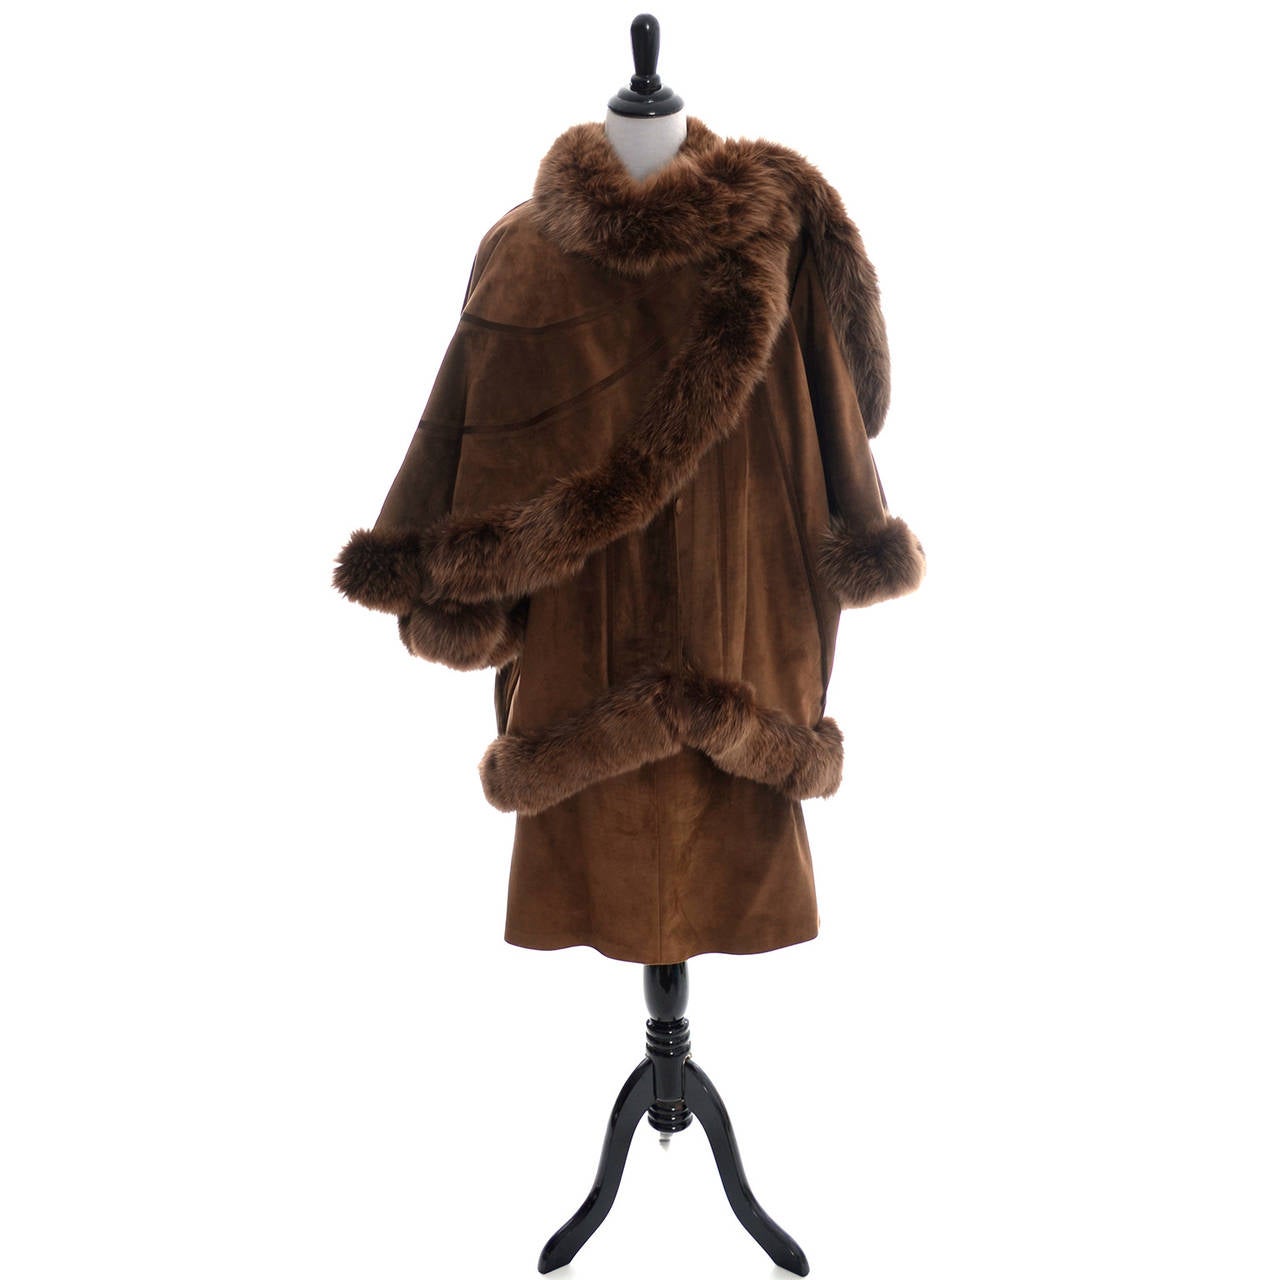 This is an absolutely outstanding 2 piece skirt and coat suit ensemble from Beltrami that was made in Italy in the 1980's.  The suede coat has an attached cape and buttons up the front. This suit comes from the estate of a woman who lived in Sweden,